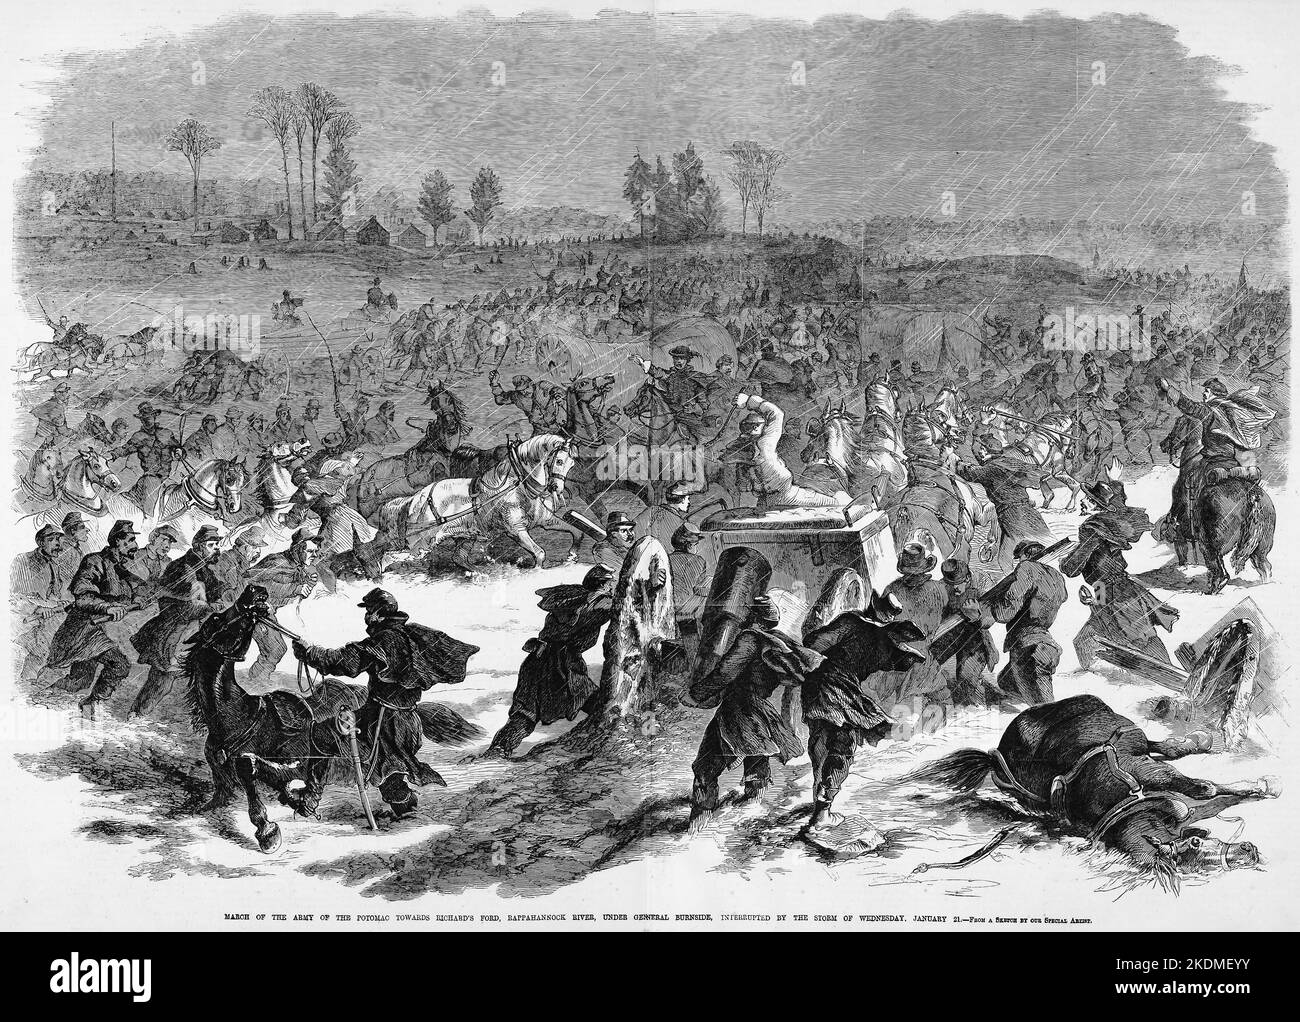 March of the Army of the Potomac towards Richard's Ford, Rappahannock River, under General Ambrose Everett Burnside, interrupted by the storm of Wednesday, January 21st, 1863. 19th century American Civil War illustration from Frank Leslie's Illustrated Newspaper Stock Photo